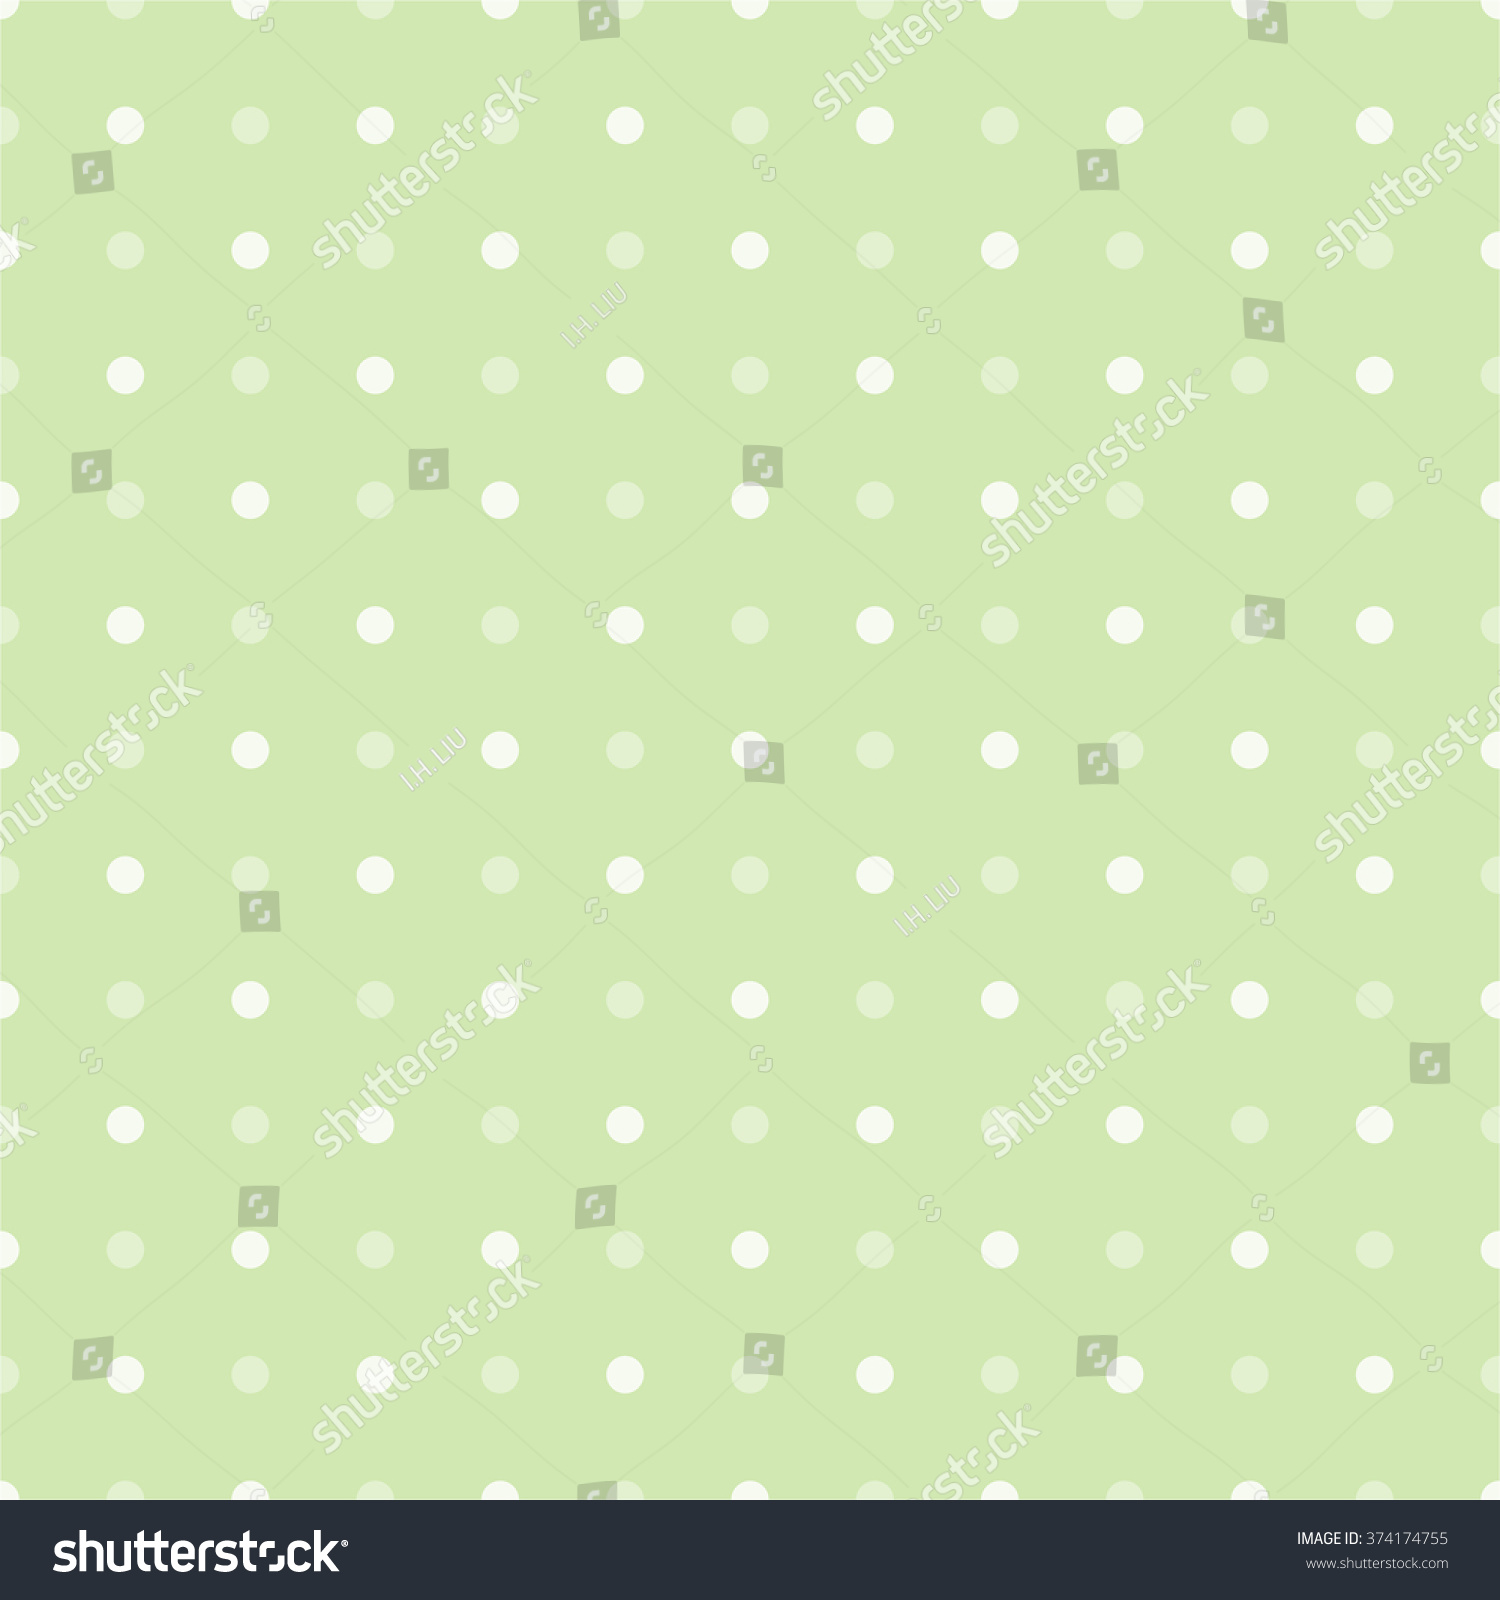 Round Dots Design Stock Vector (Royalty Free) 374174755 | Shutterstock